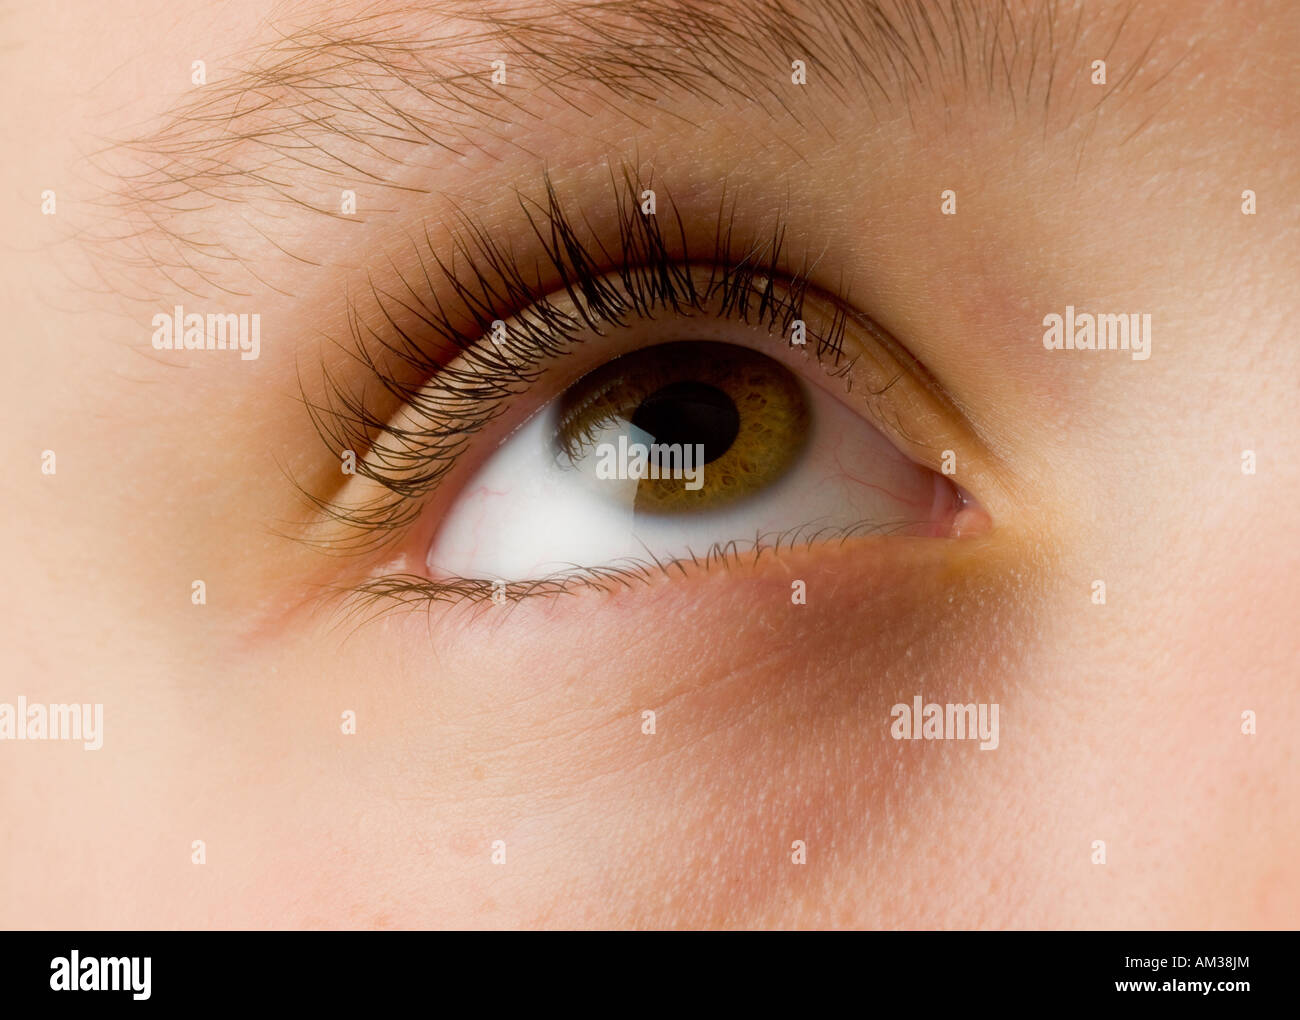 Close-up of upward-gazing brown eye with long black lashes on a Caucasian face. Stock Photo